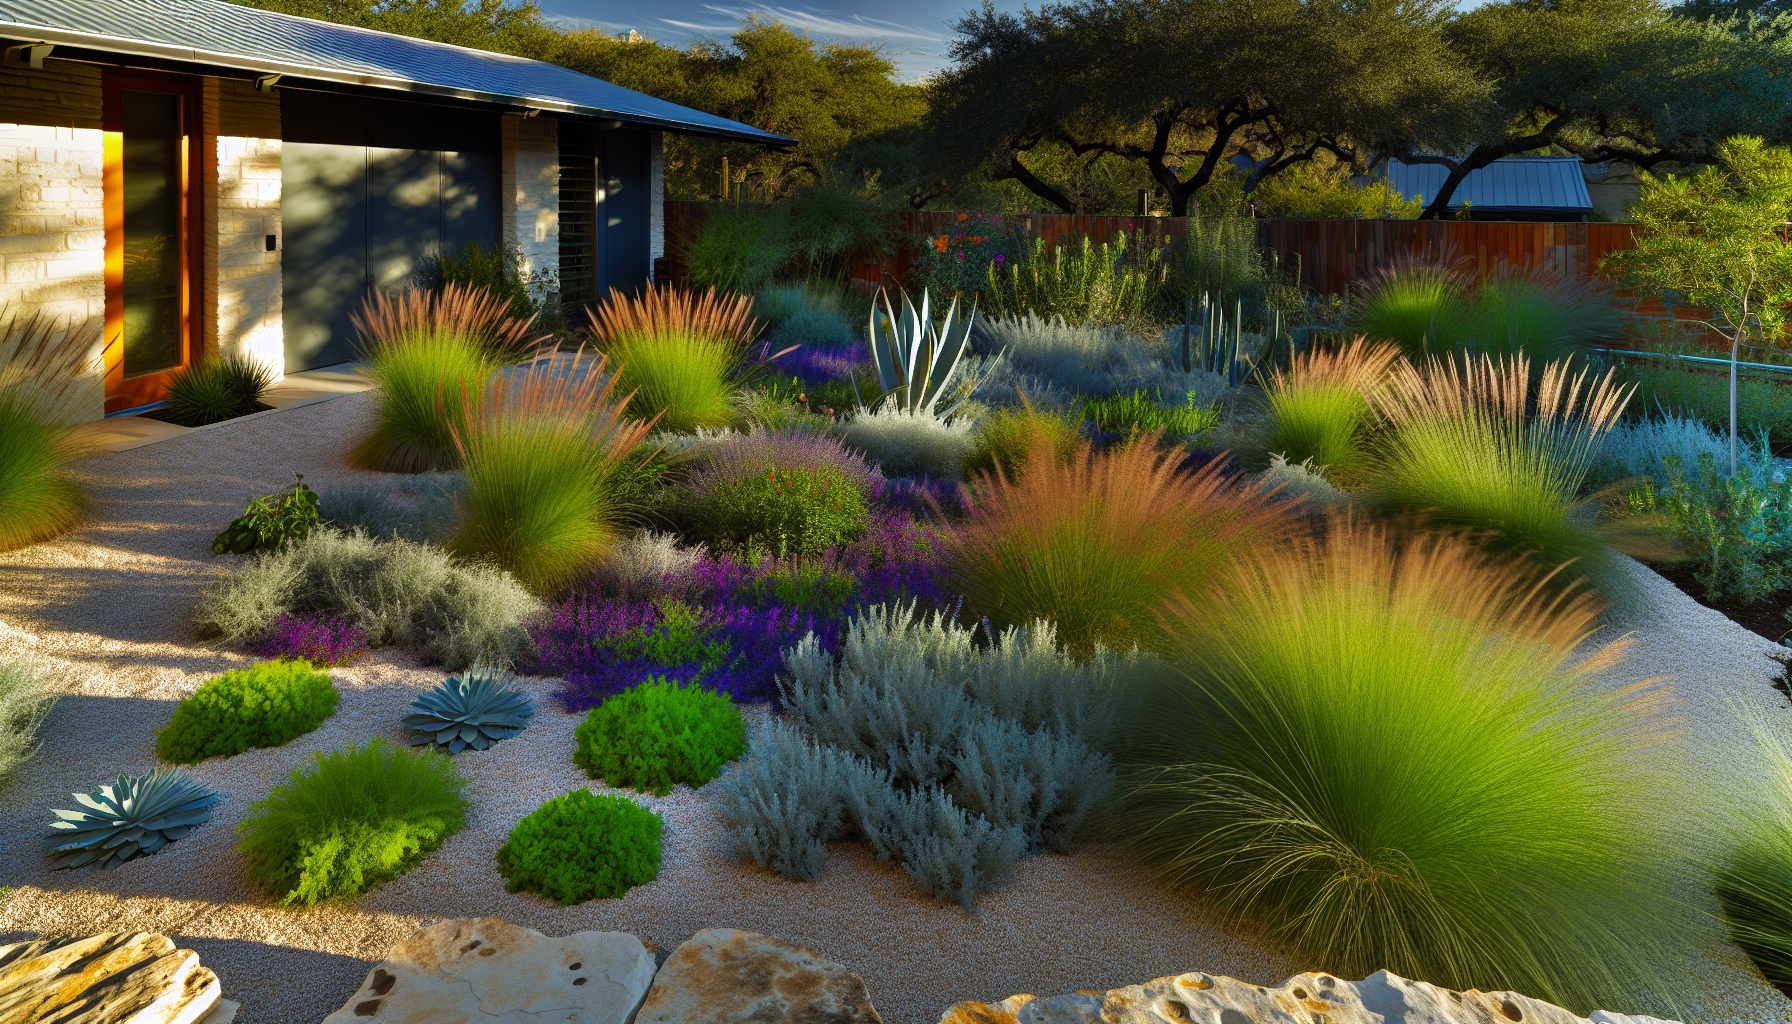 A xeriscape garden in Austin, Texas with native plants and ornamental grasses